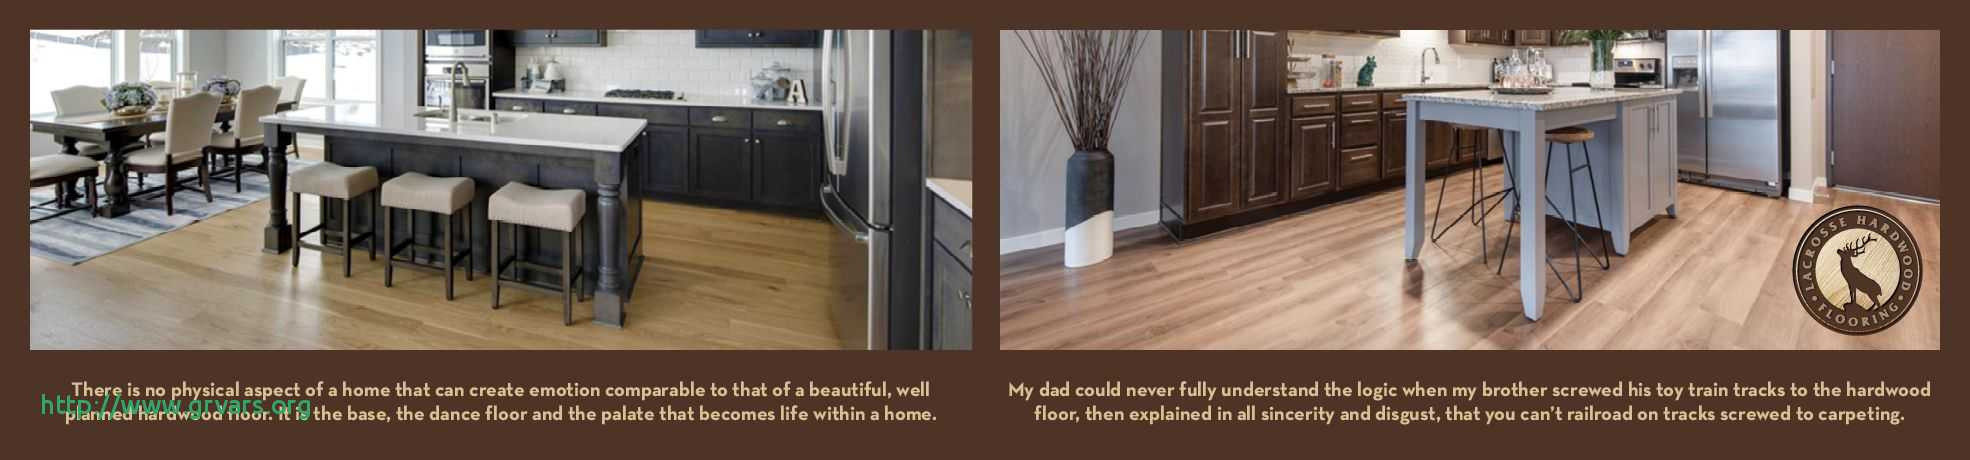 Hardwood Flooring Videos Of 24 Luxe Floors for Less Reviews Ideas Blog In Floors for Less Reviews Beau 40 Difference Between Laminate and Hardwood Flooring Ideas